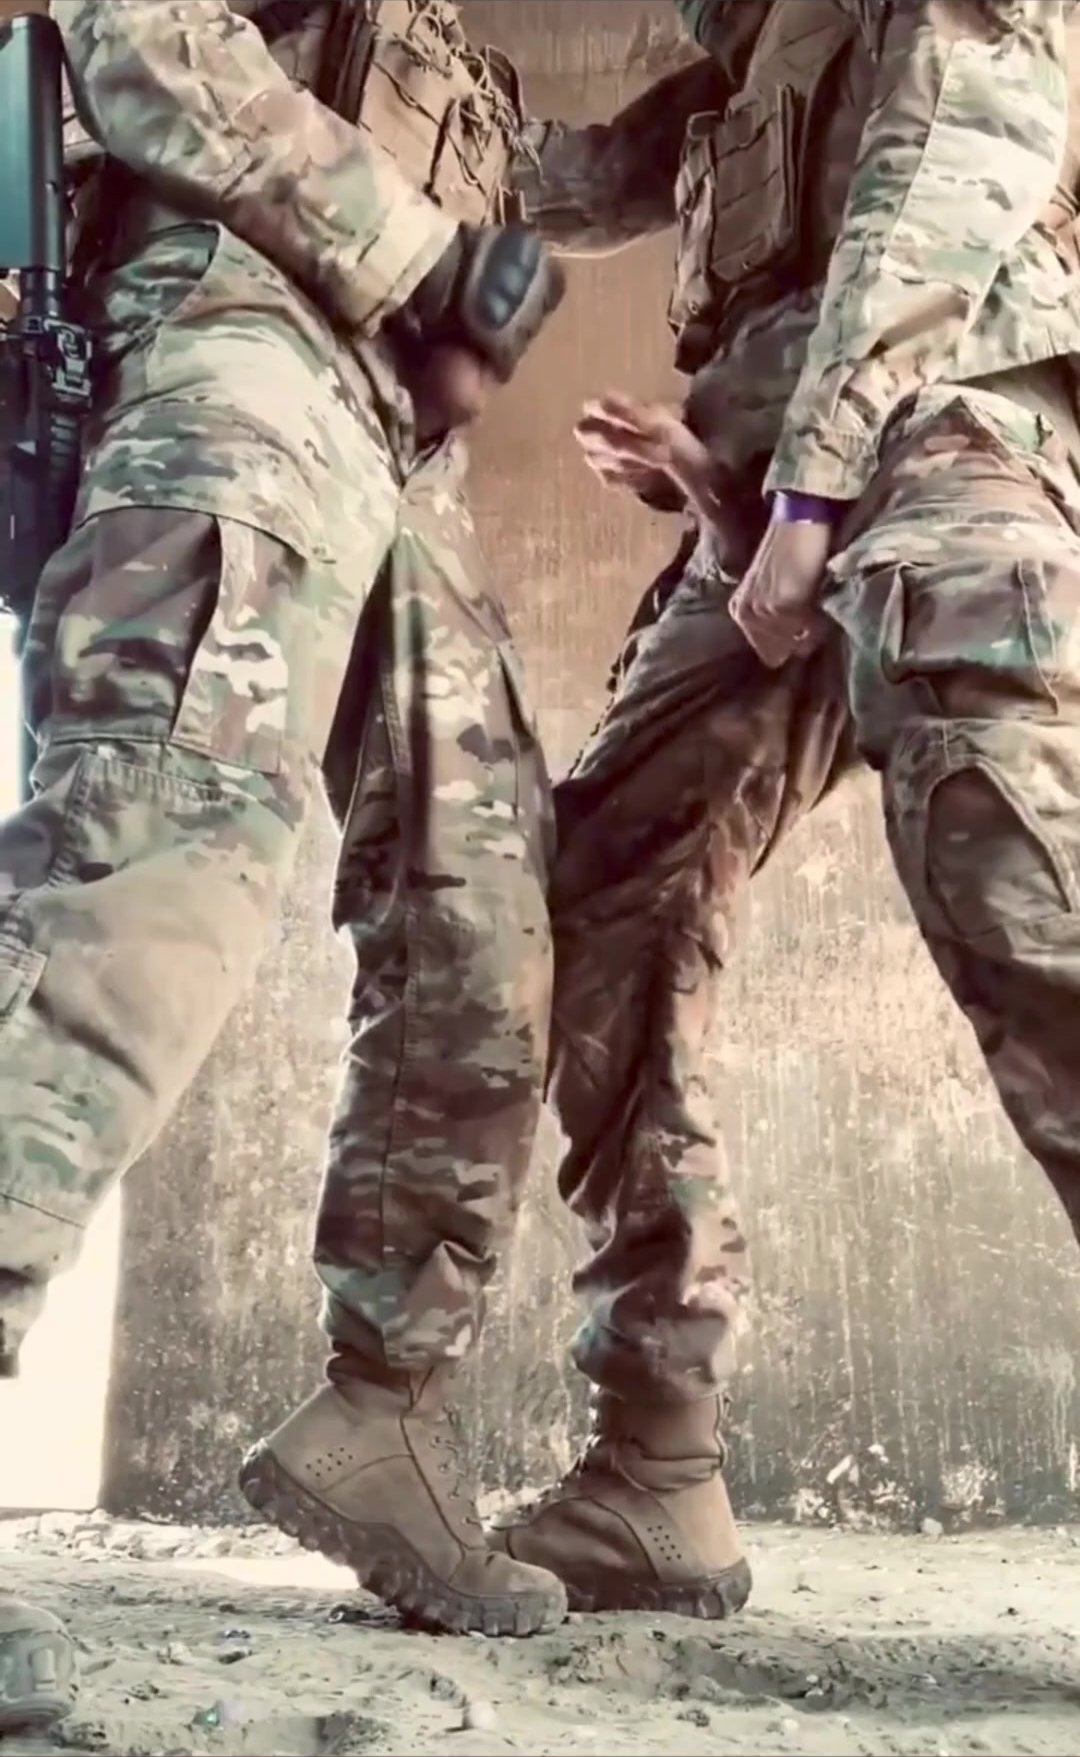 Two soliders have fun